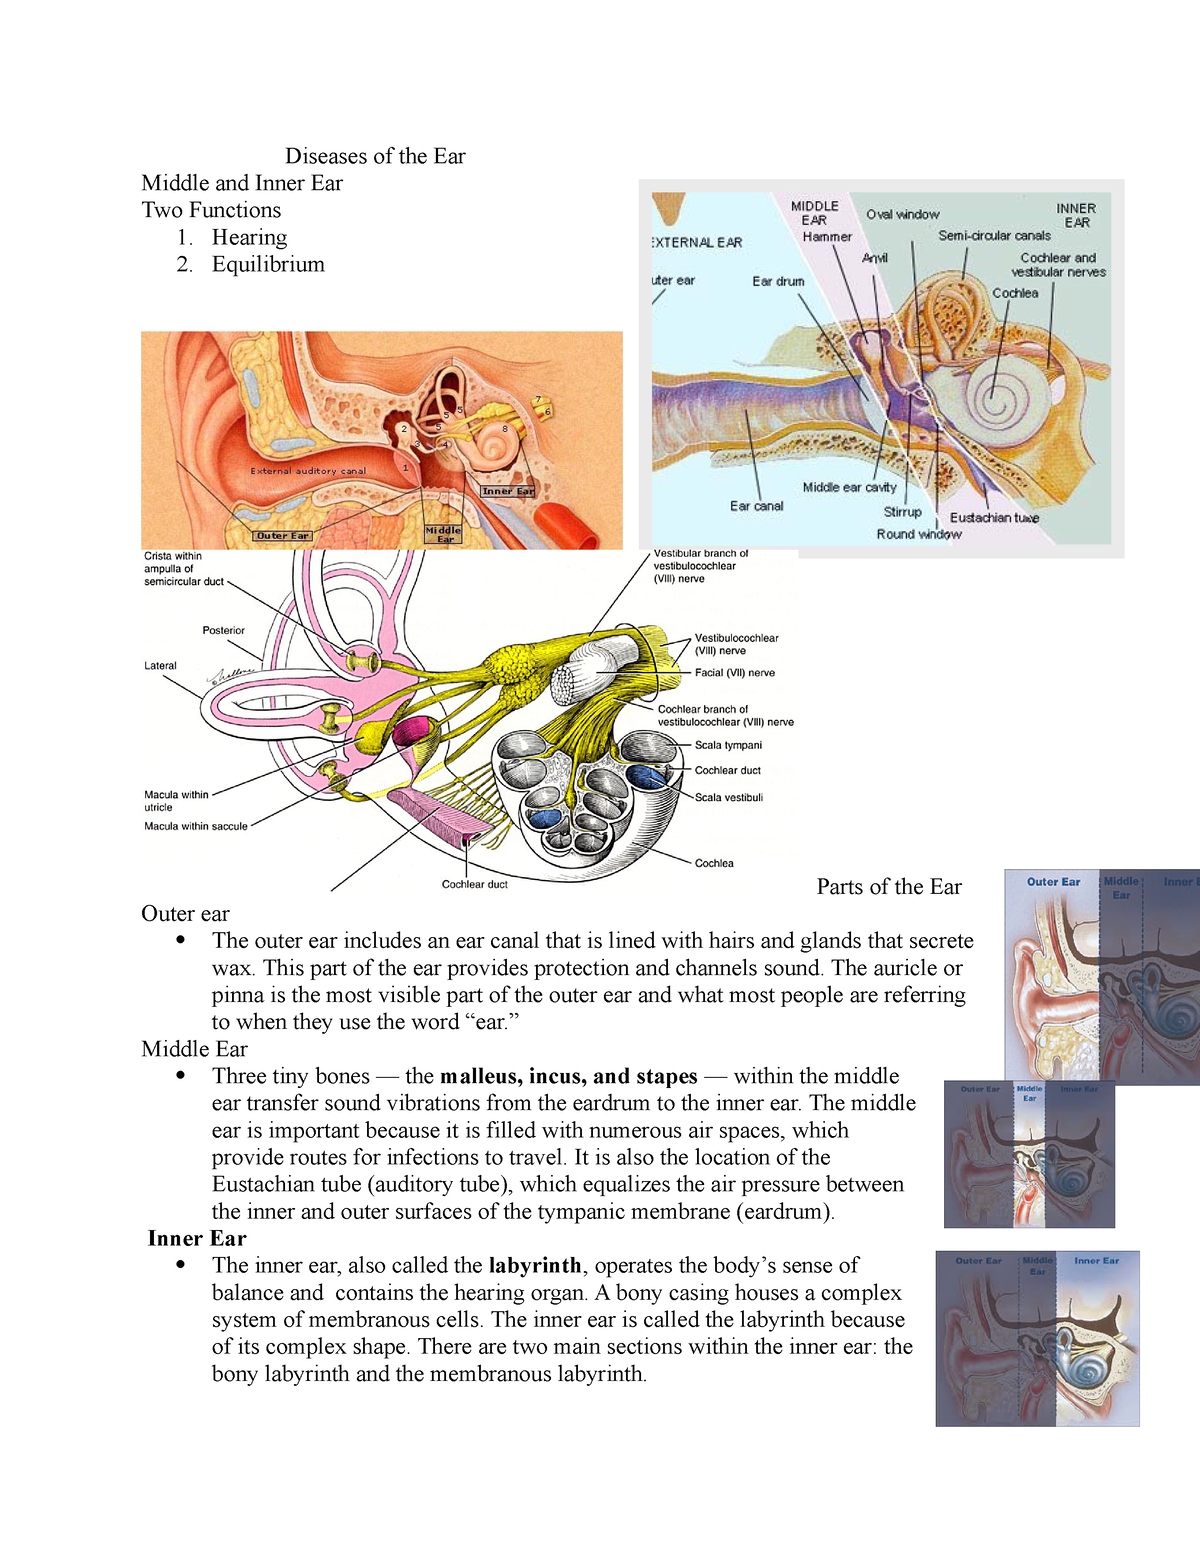 Diseases Of The Ear Lecture Notes Diseases Of The Ear Middle And